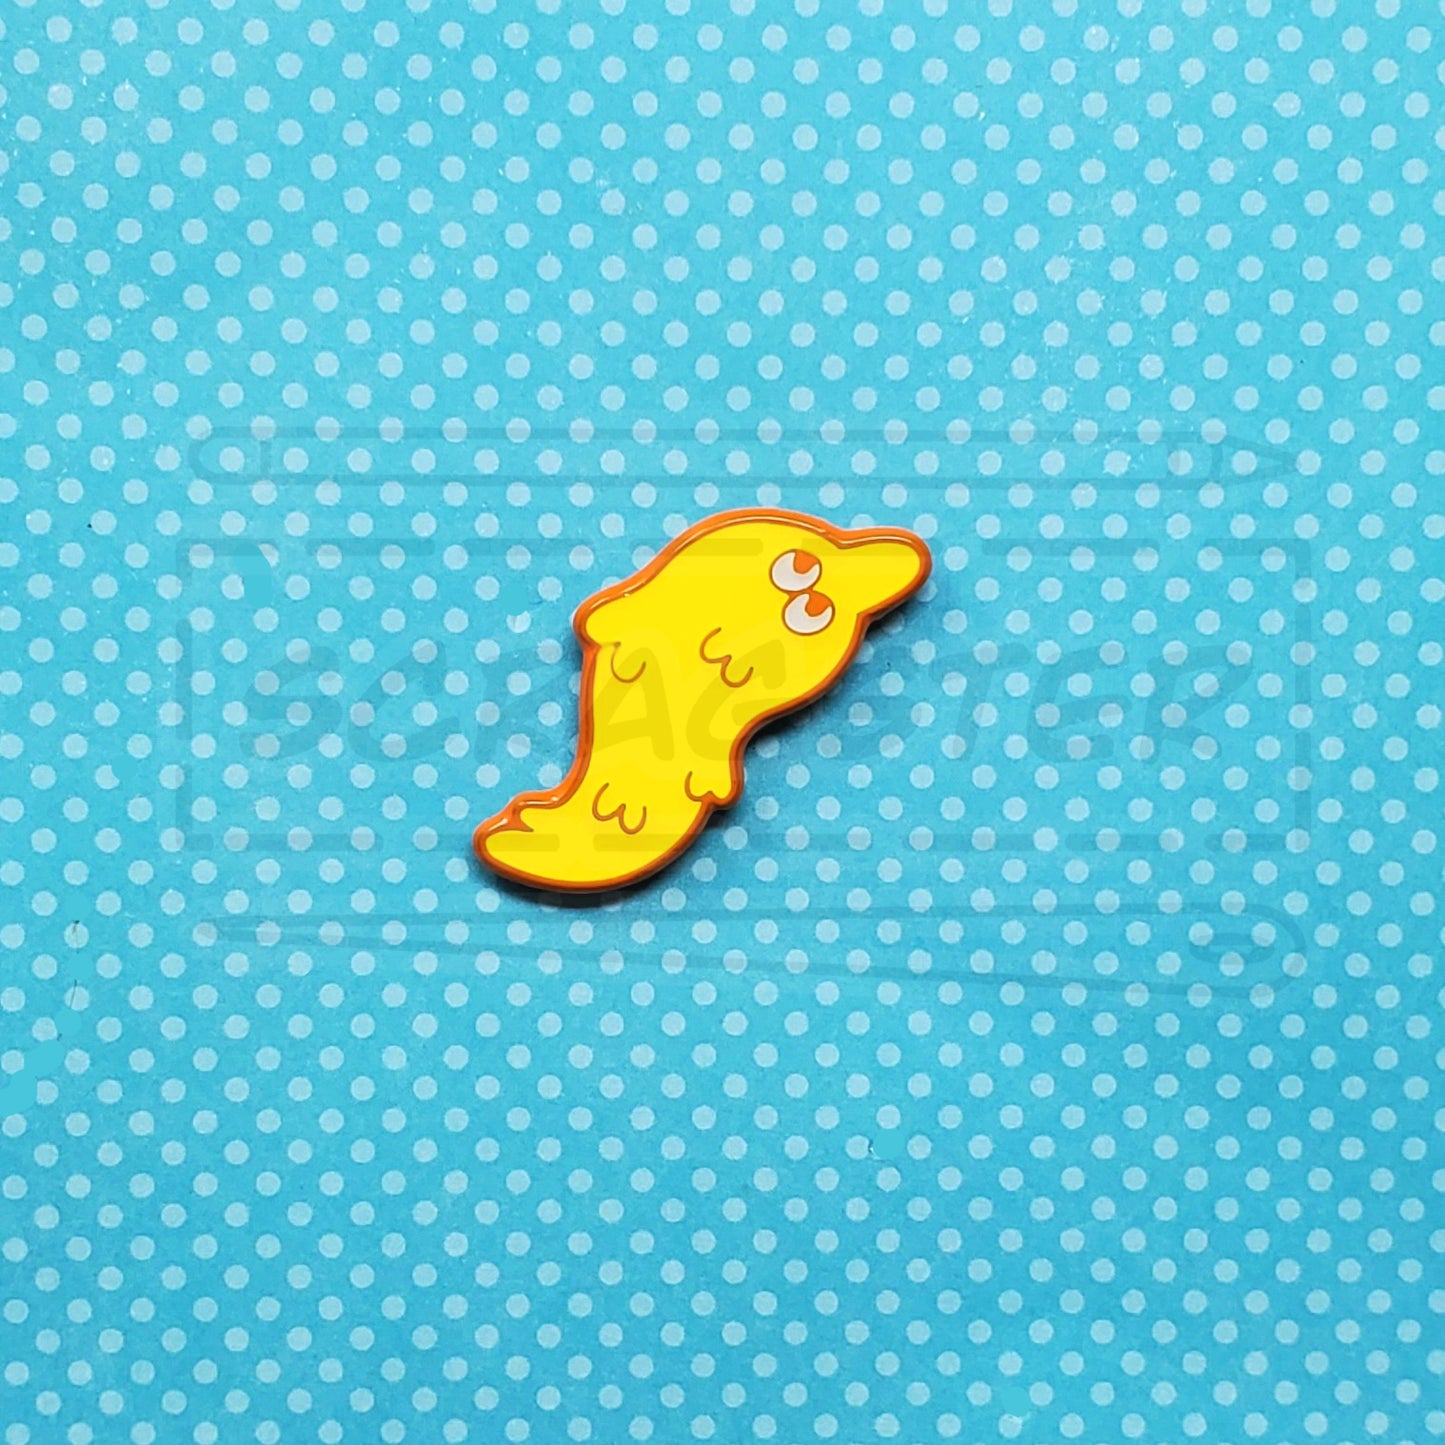 Worm on a String 1.5" Dyed Metal Enamel Pin